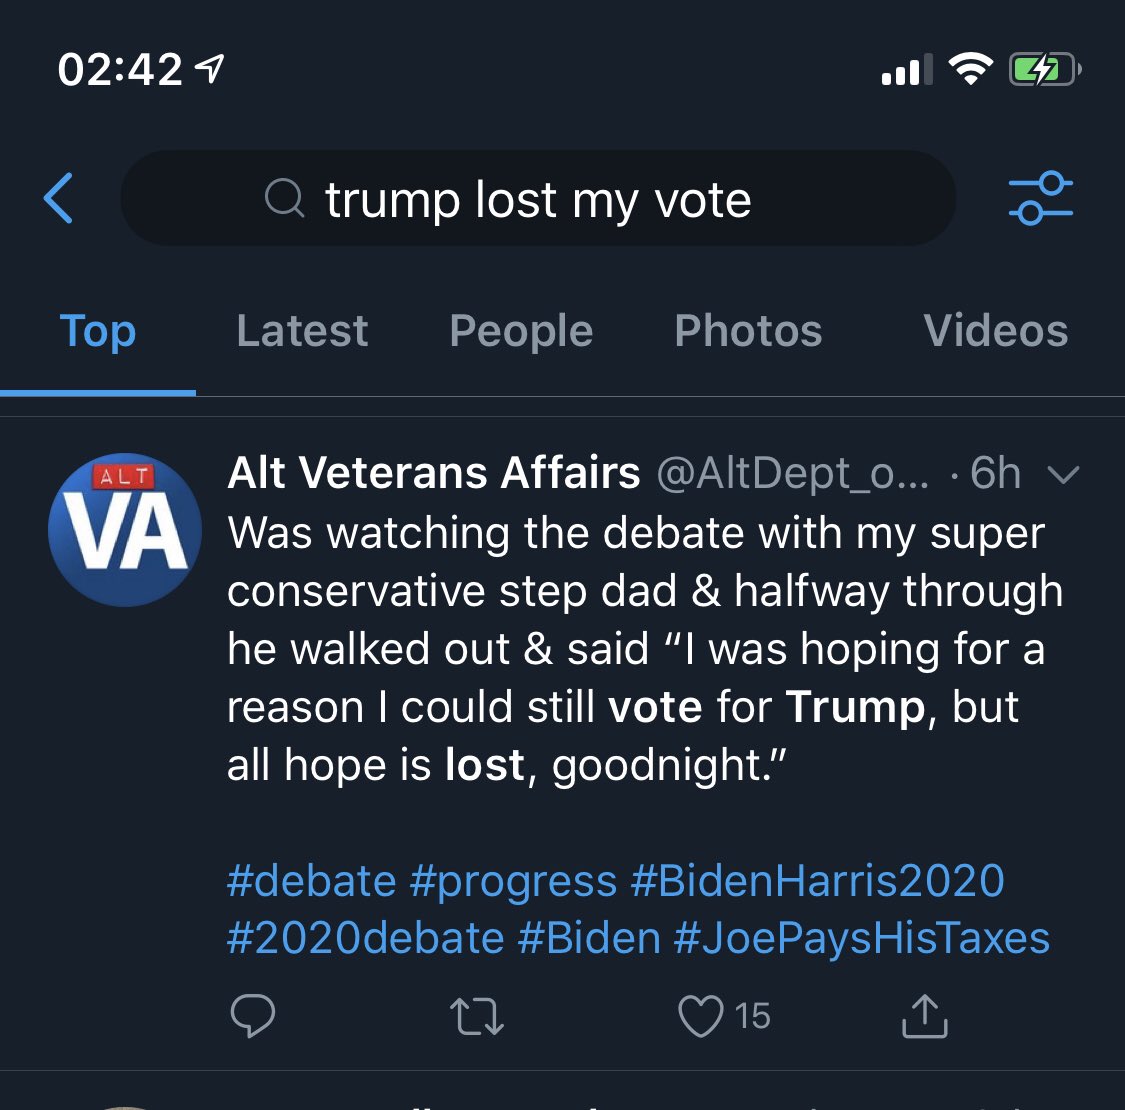 Still more votes Trump lost. There may be the odd one from before the debate or the occasional repeat if the same person tweeted multiple times.3/